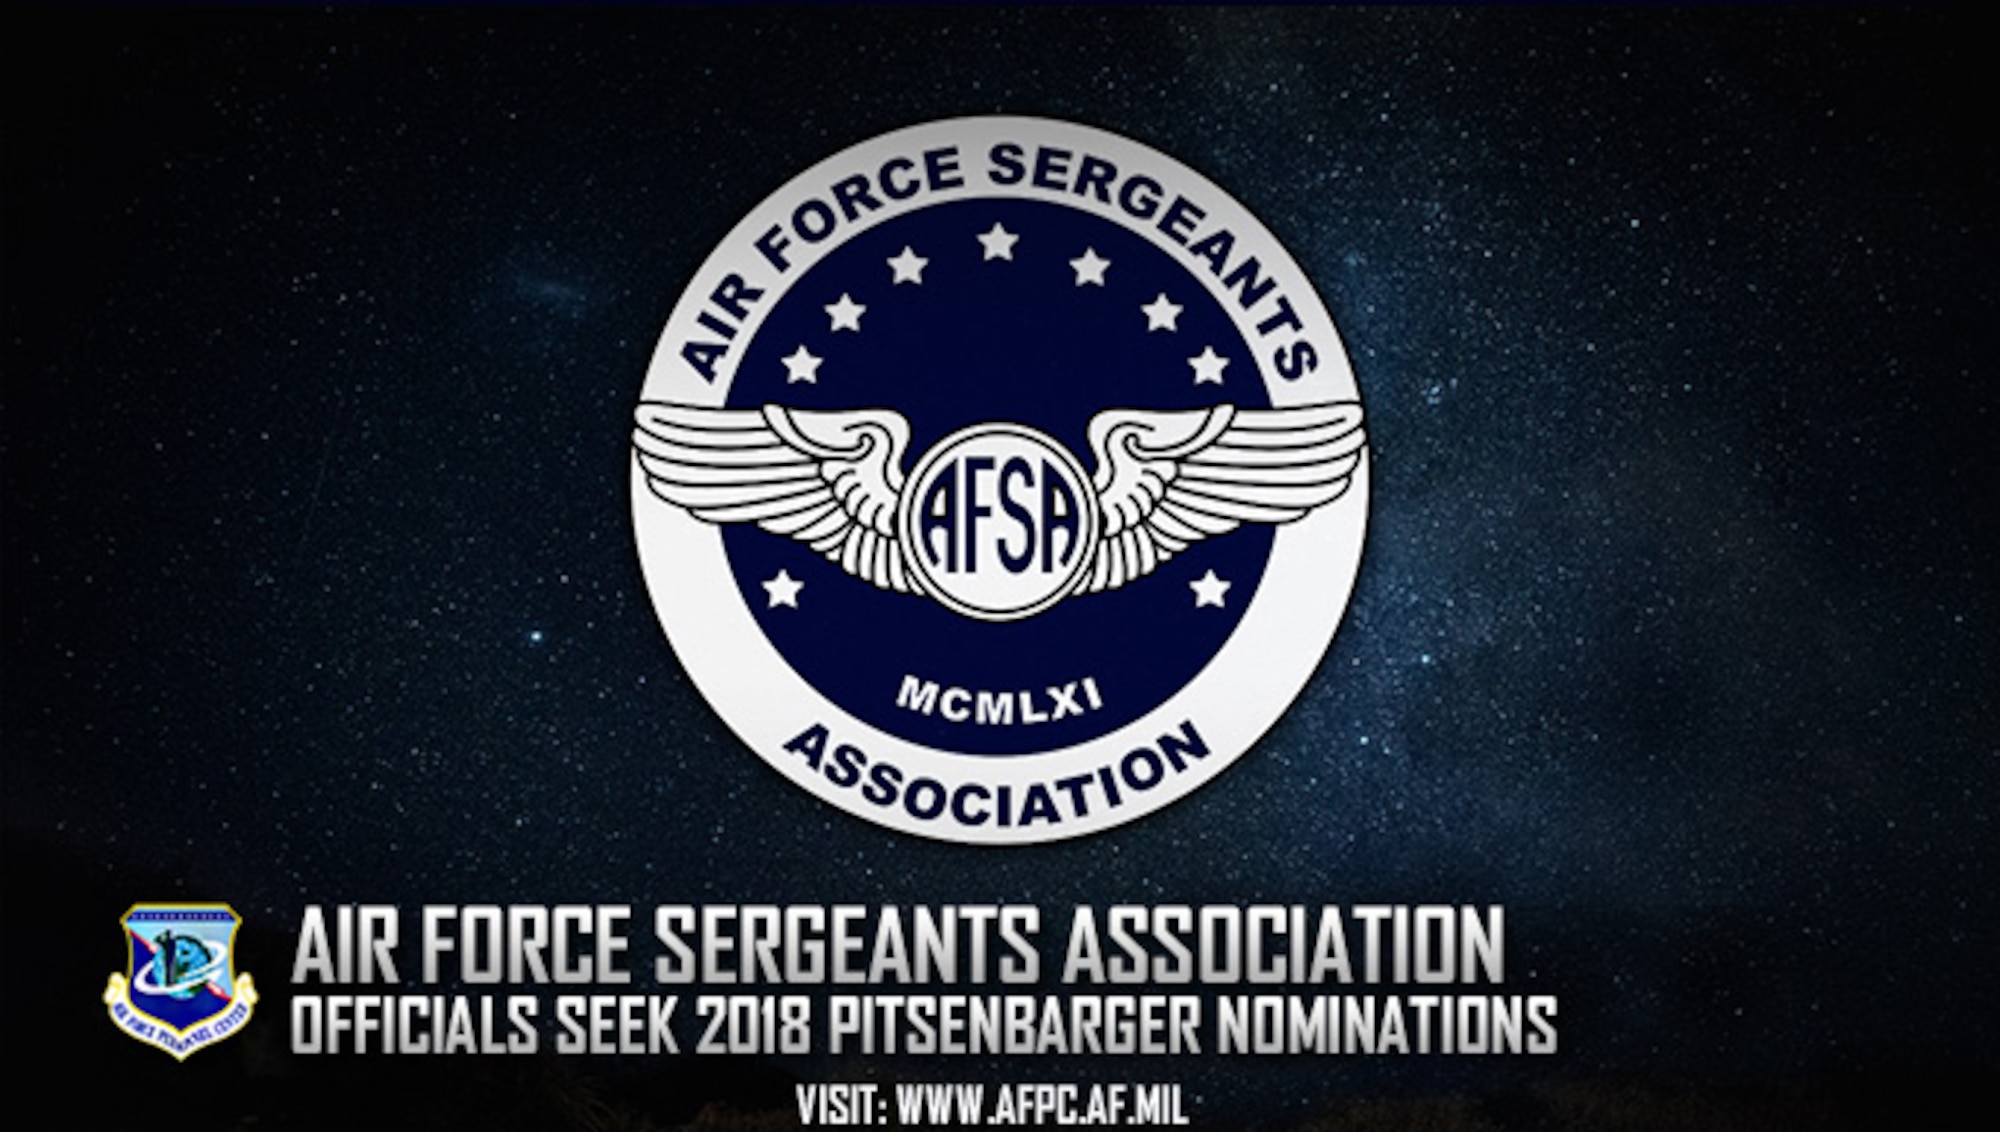 Officials are currently accepting nominations for the 2018 Air Force Sergeants Association Pitsenbarger Award through March 1, 2018. The award is presented annually to an Air Force enlisted member who has performed a heroic act, on or off duty, which resulted in the saving of life or prevention of serious injury. (U.S. Air Force graphic by Staff Sgt. Alexx Pons)